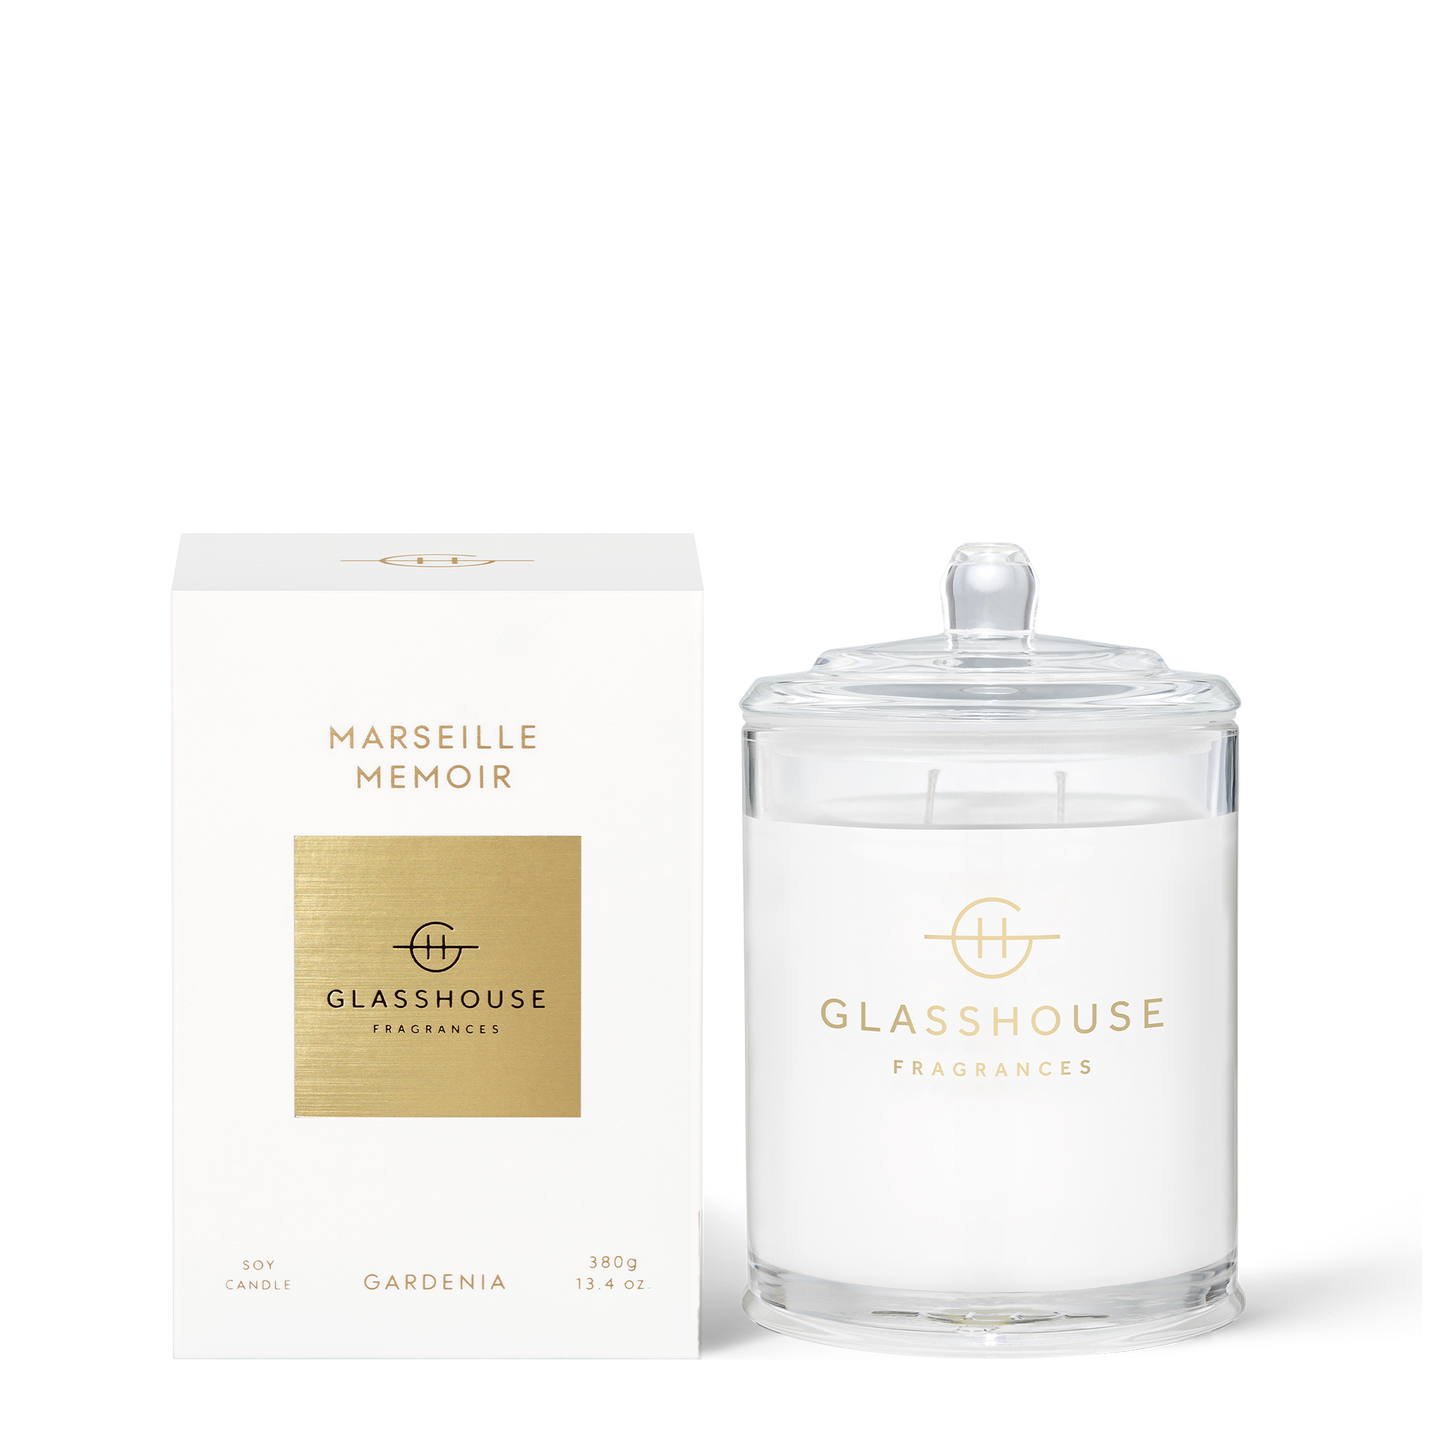 13.4oz Marseille Memoir - Triple Scented Soy Candle